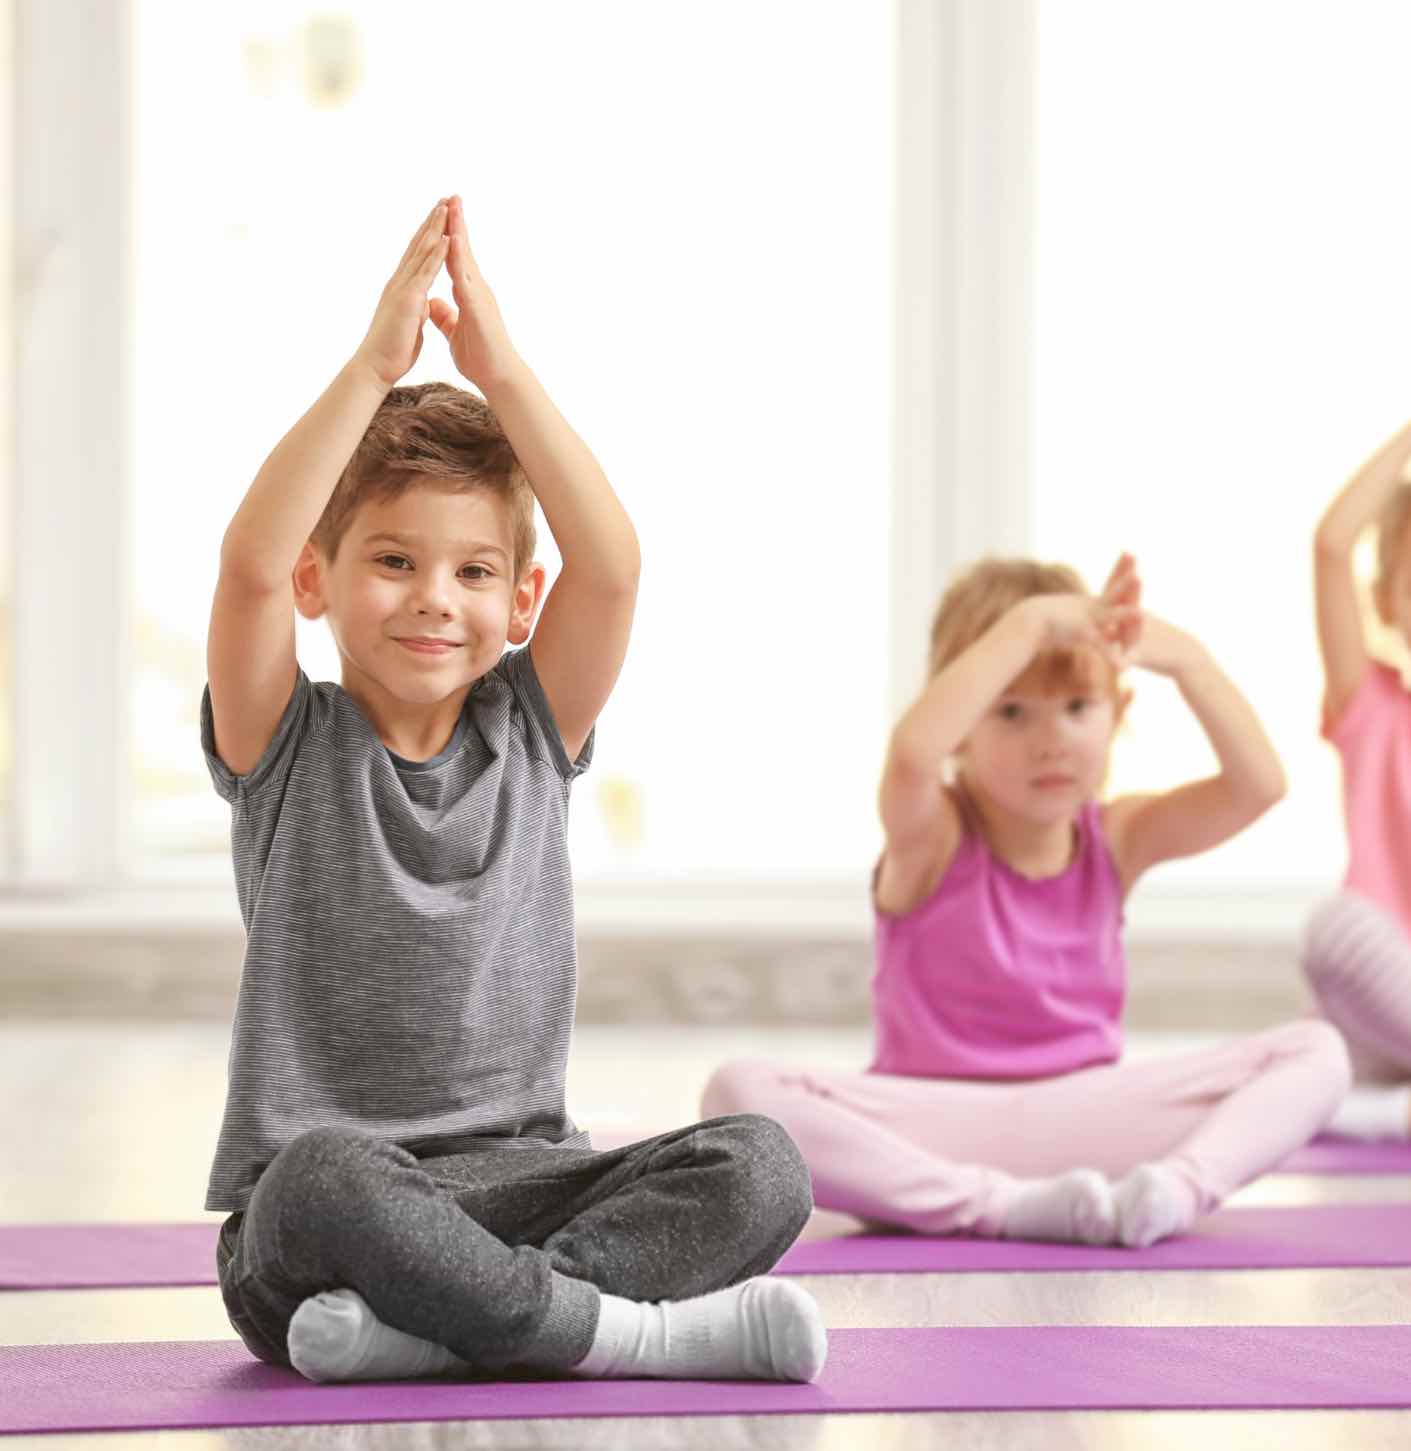 These kids enjoy practicing mindfulness through yoga - learn more tips with Romp n' Roll!